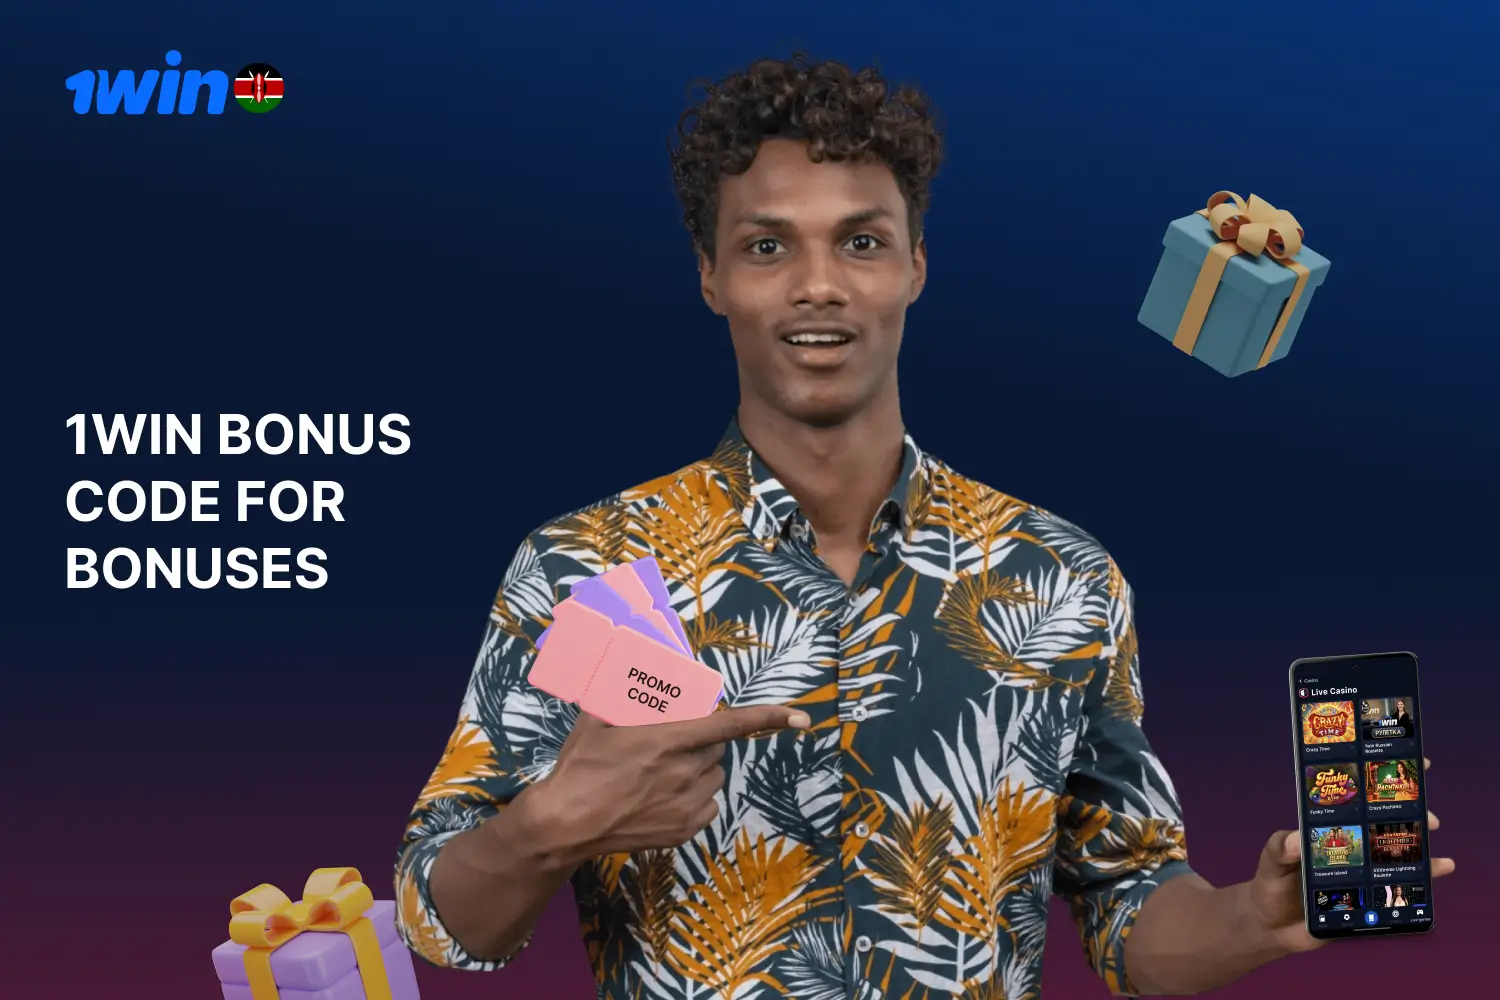 New 1win users from Kenya can enter a promotional code and receive a nice bonus